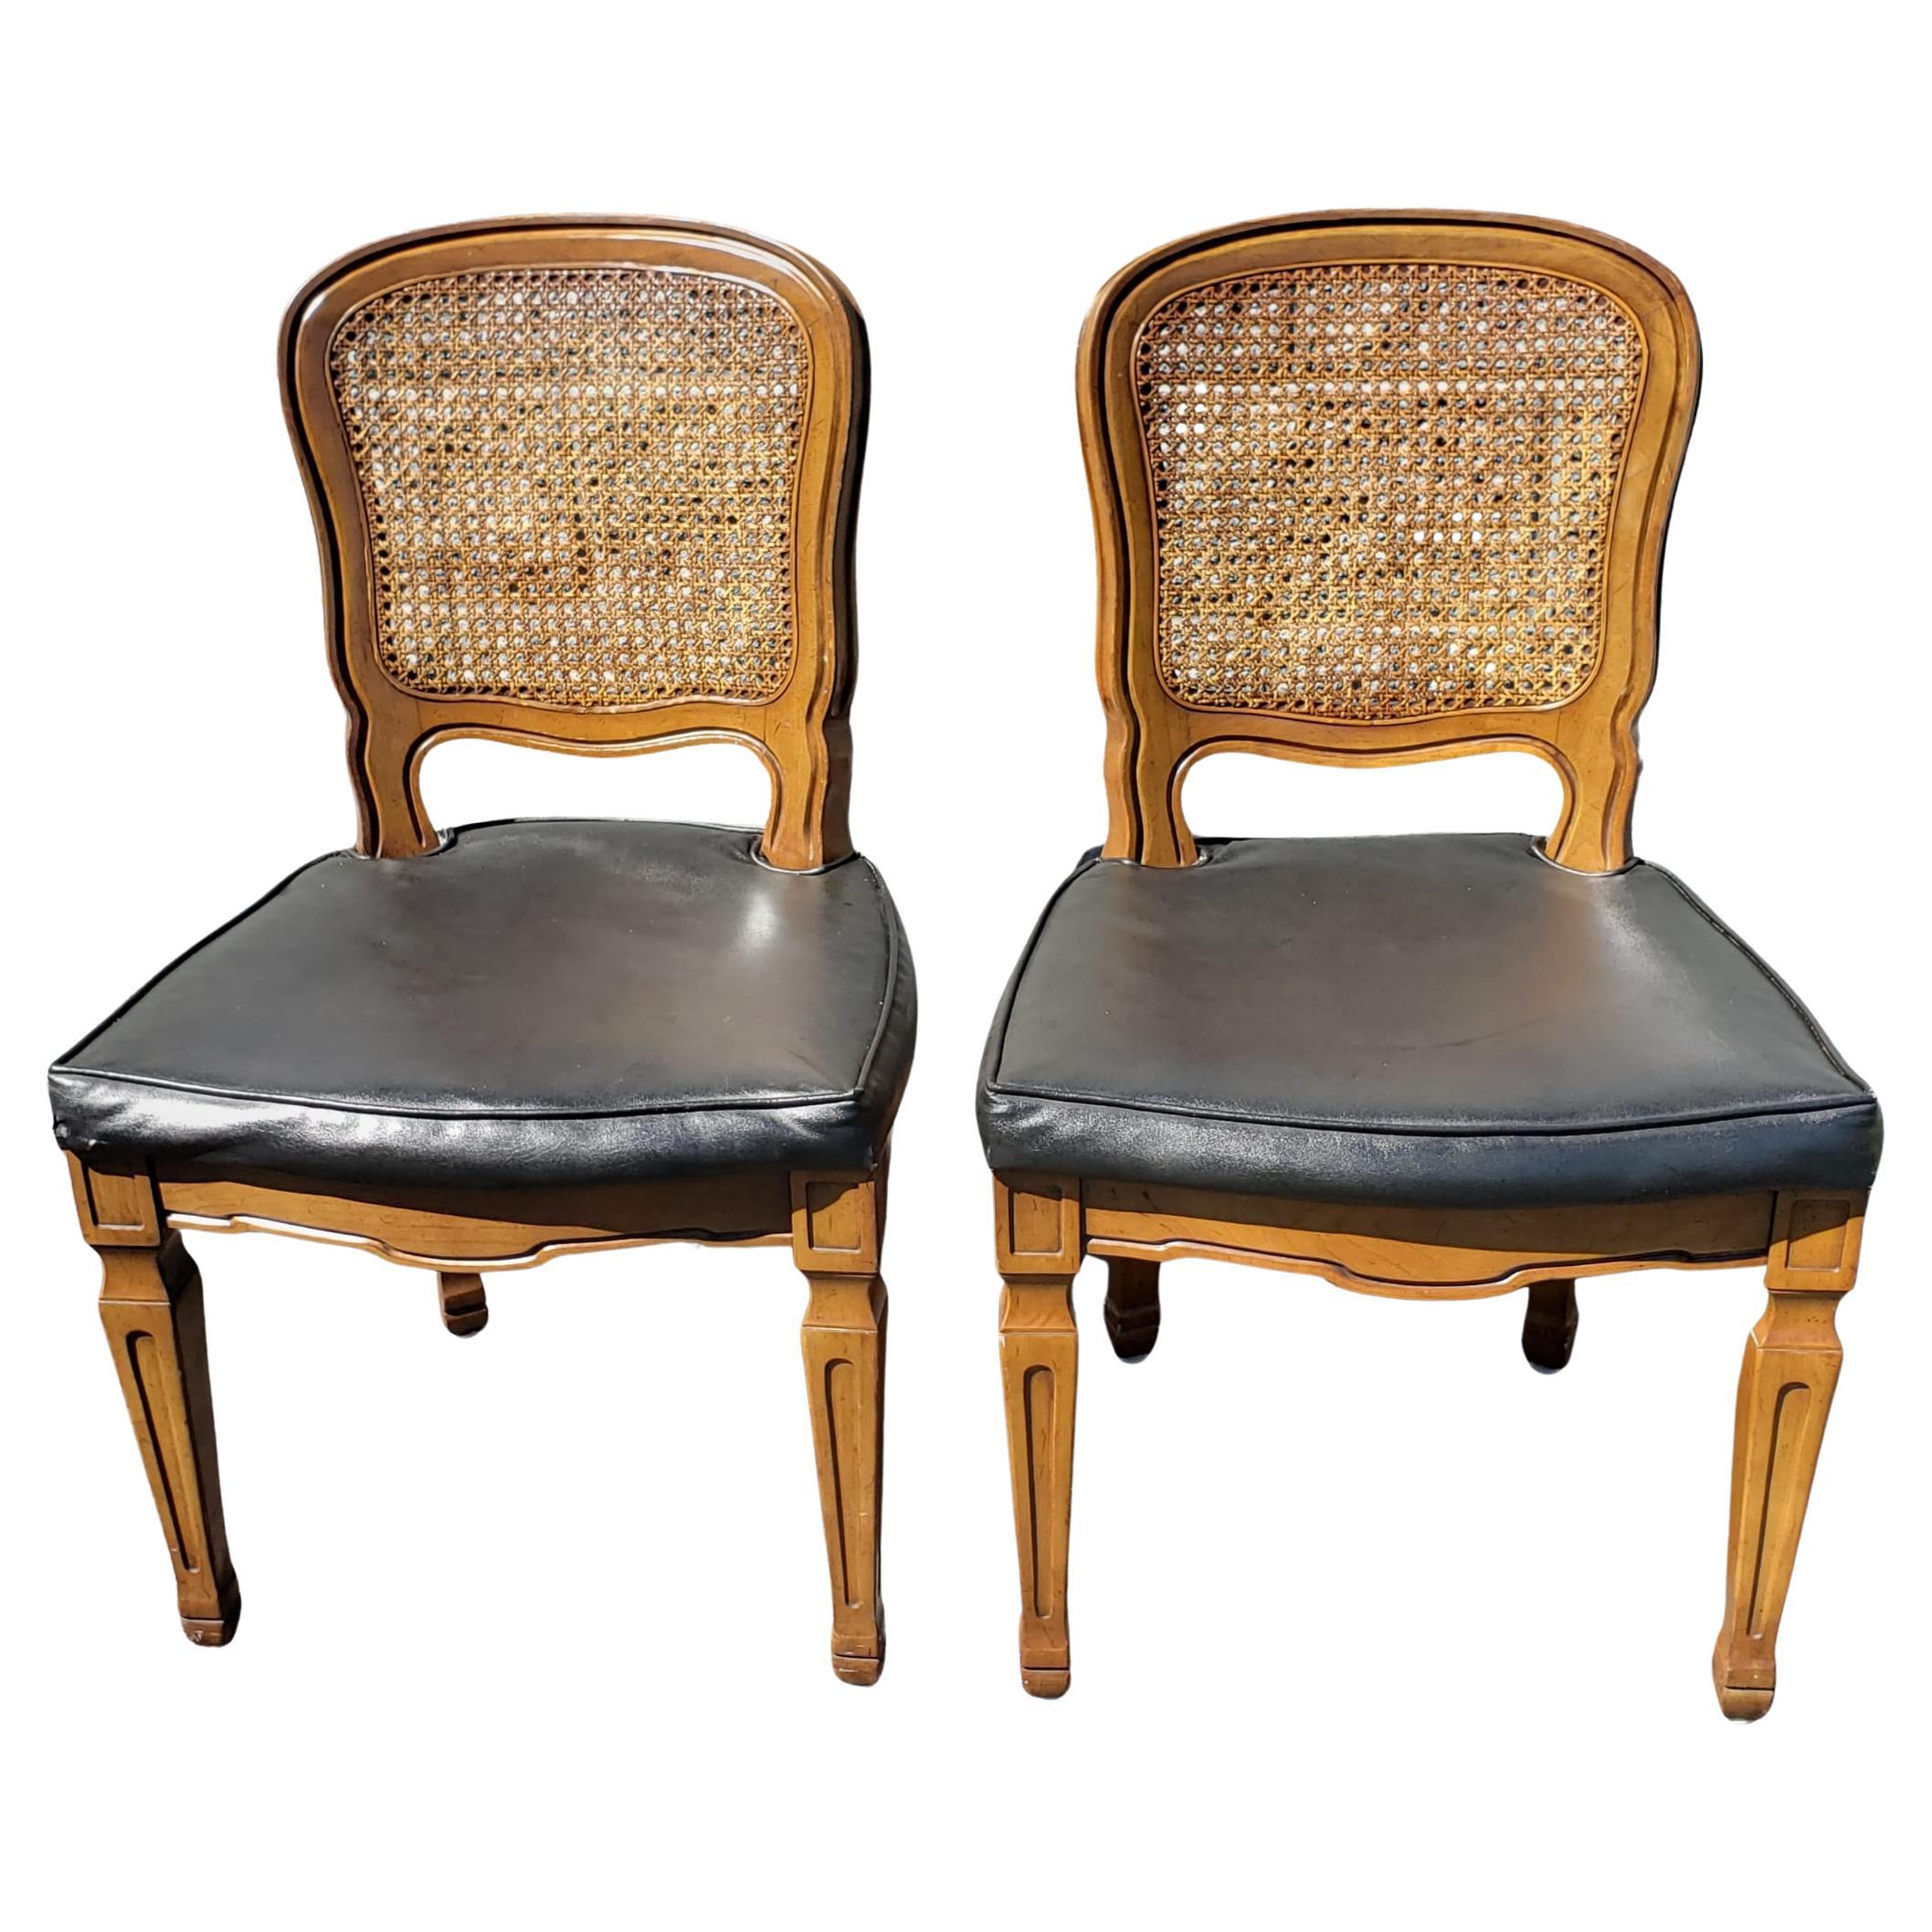 Caning Henredon French Country Cane Back w/ Leatherette Seats Dining Chairs, C 1960s